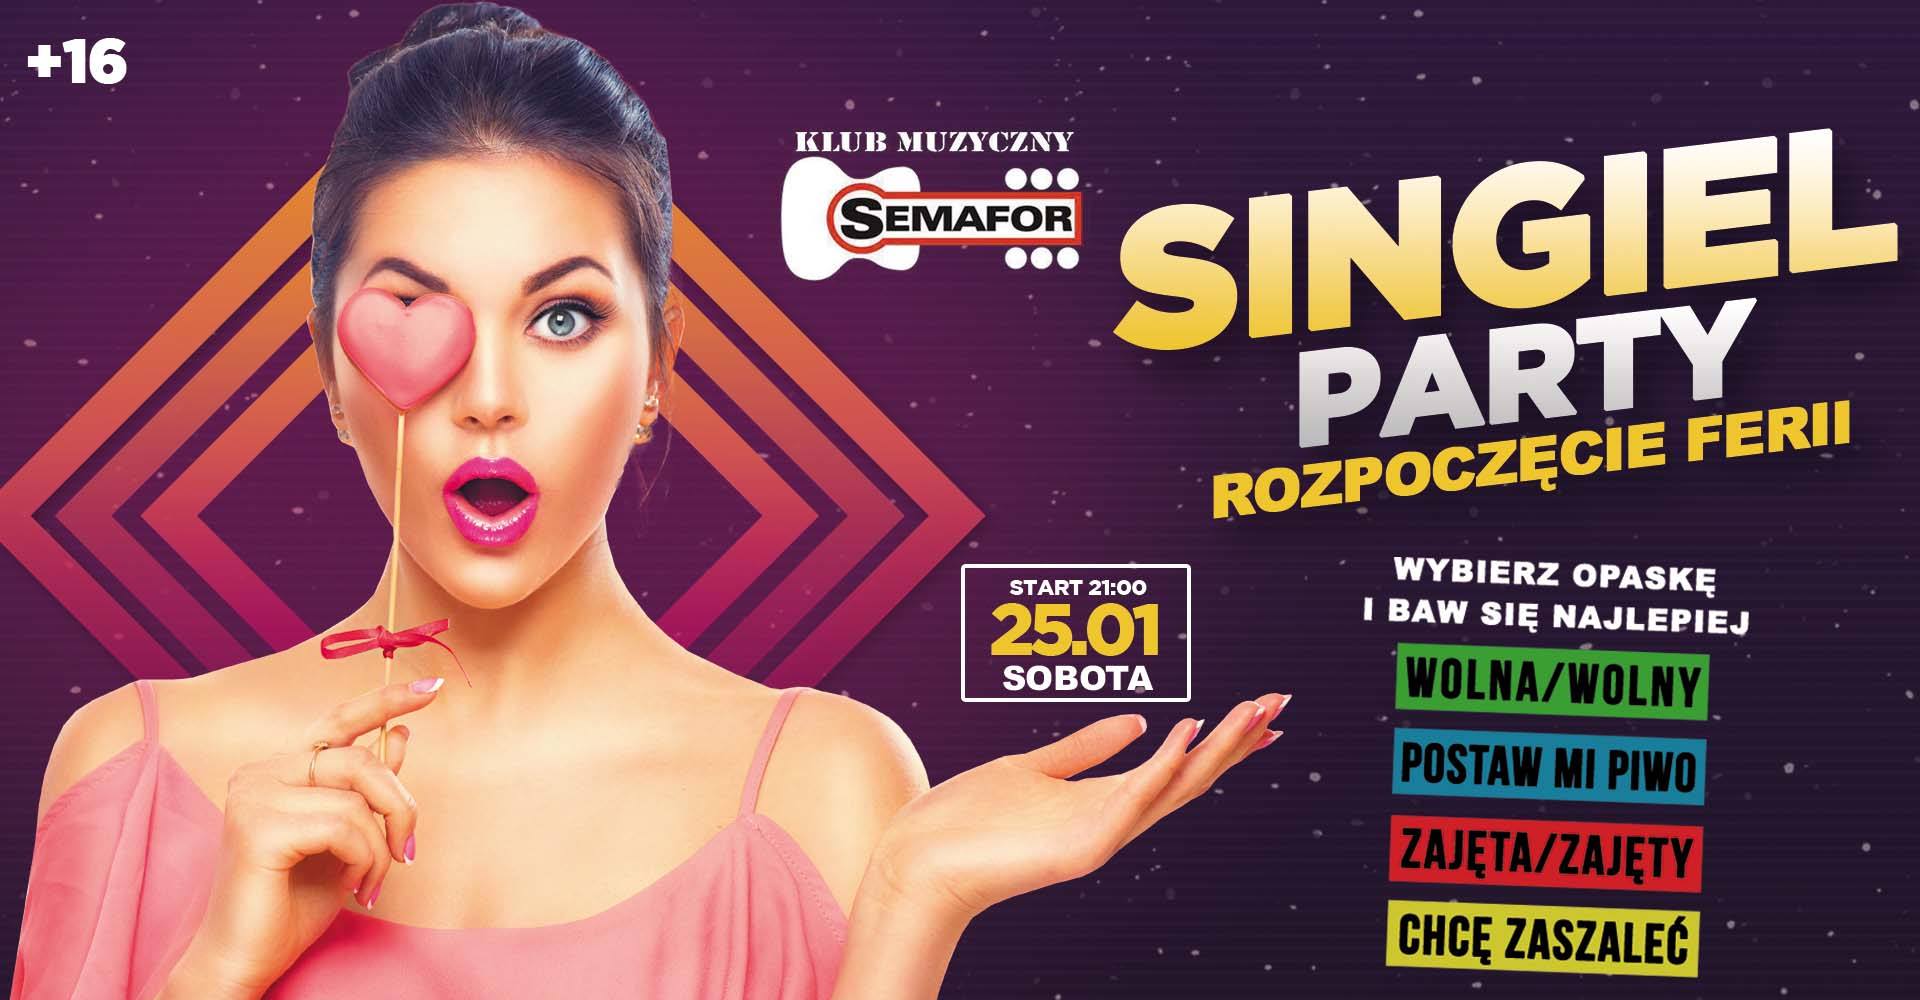 Read more about the article ★ Licealne Singiel Party ★ Rozpoczęcie Ferii ★ Semafor ★ 16+